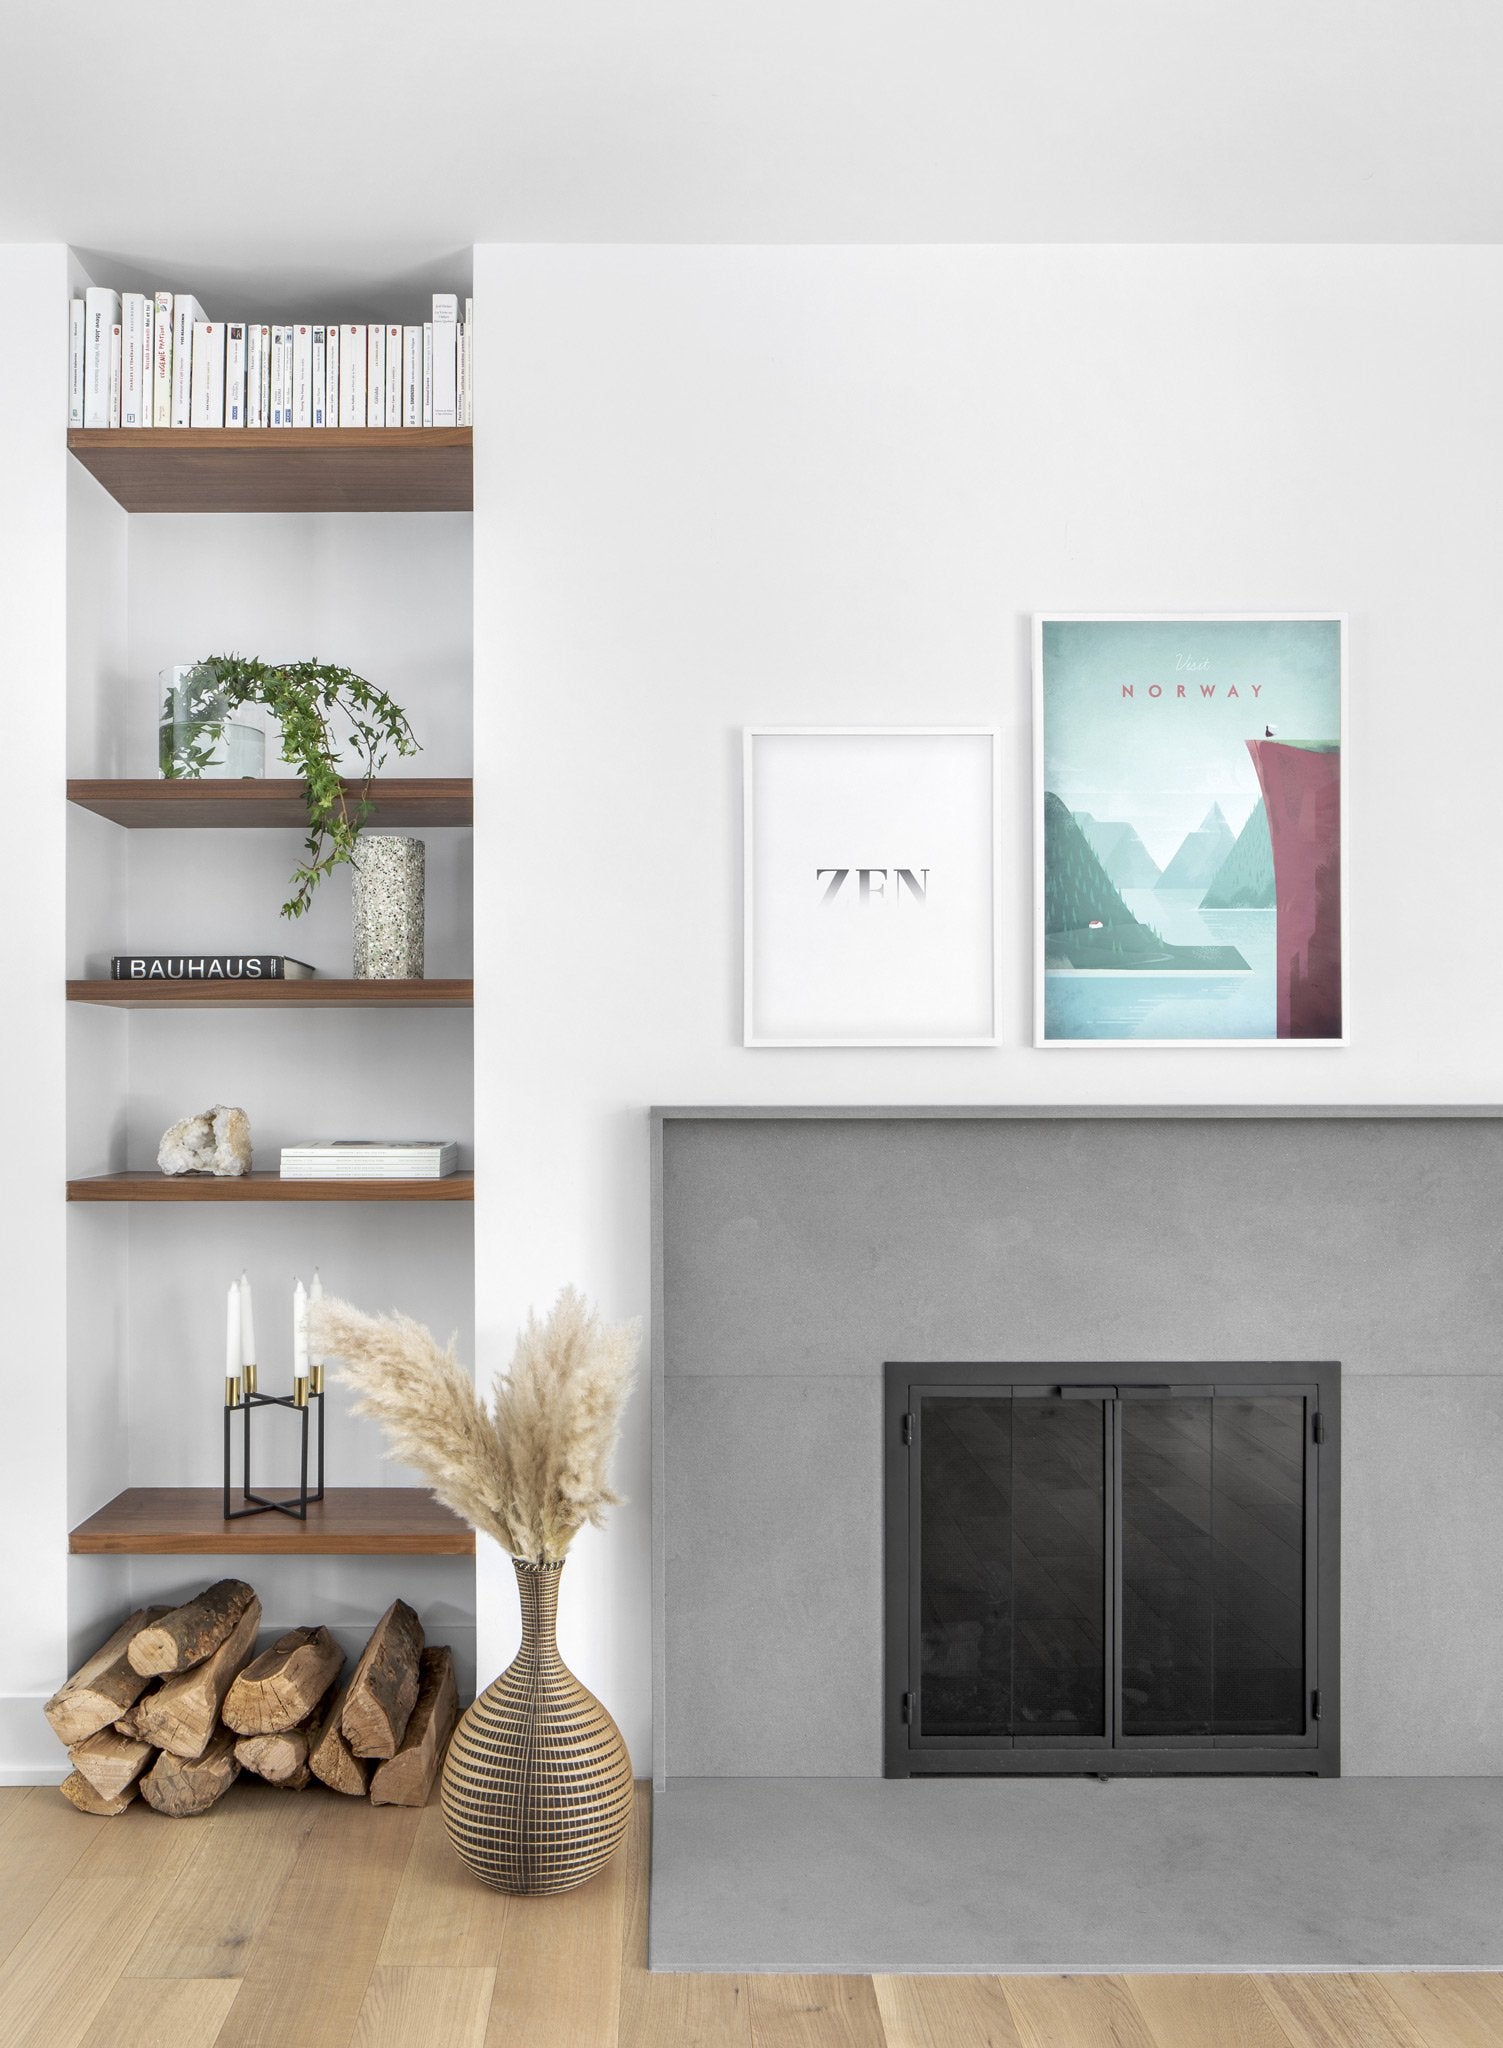 Modern minimalist travel poster by Opposite Wall with poster duo including illustration of Norway - Living Room